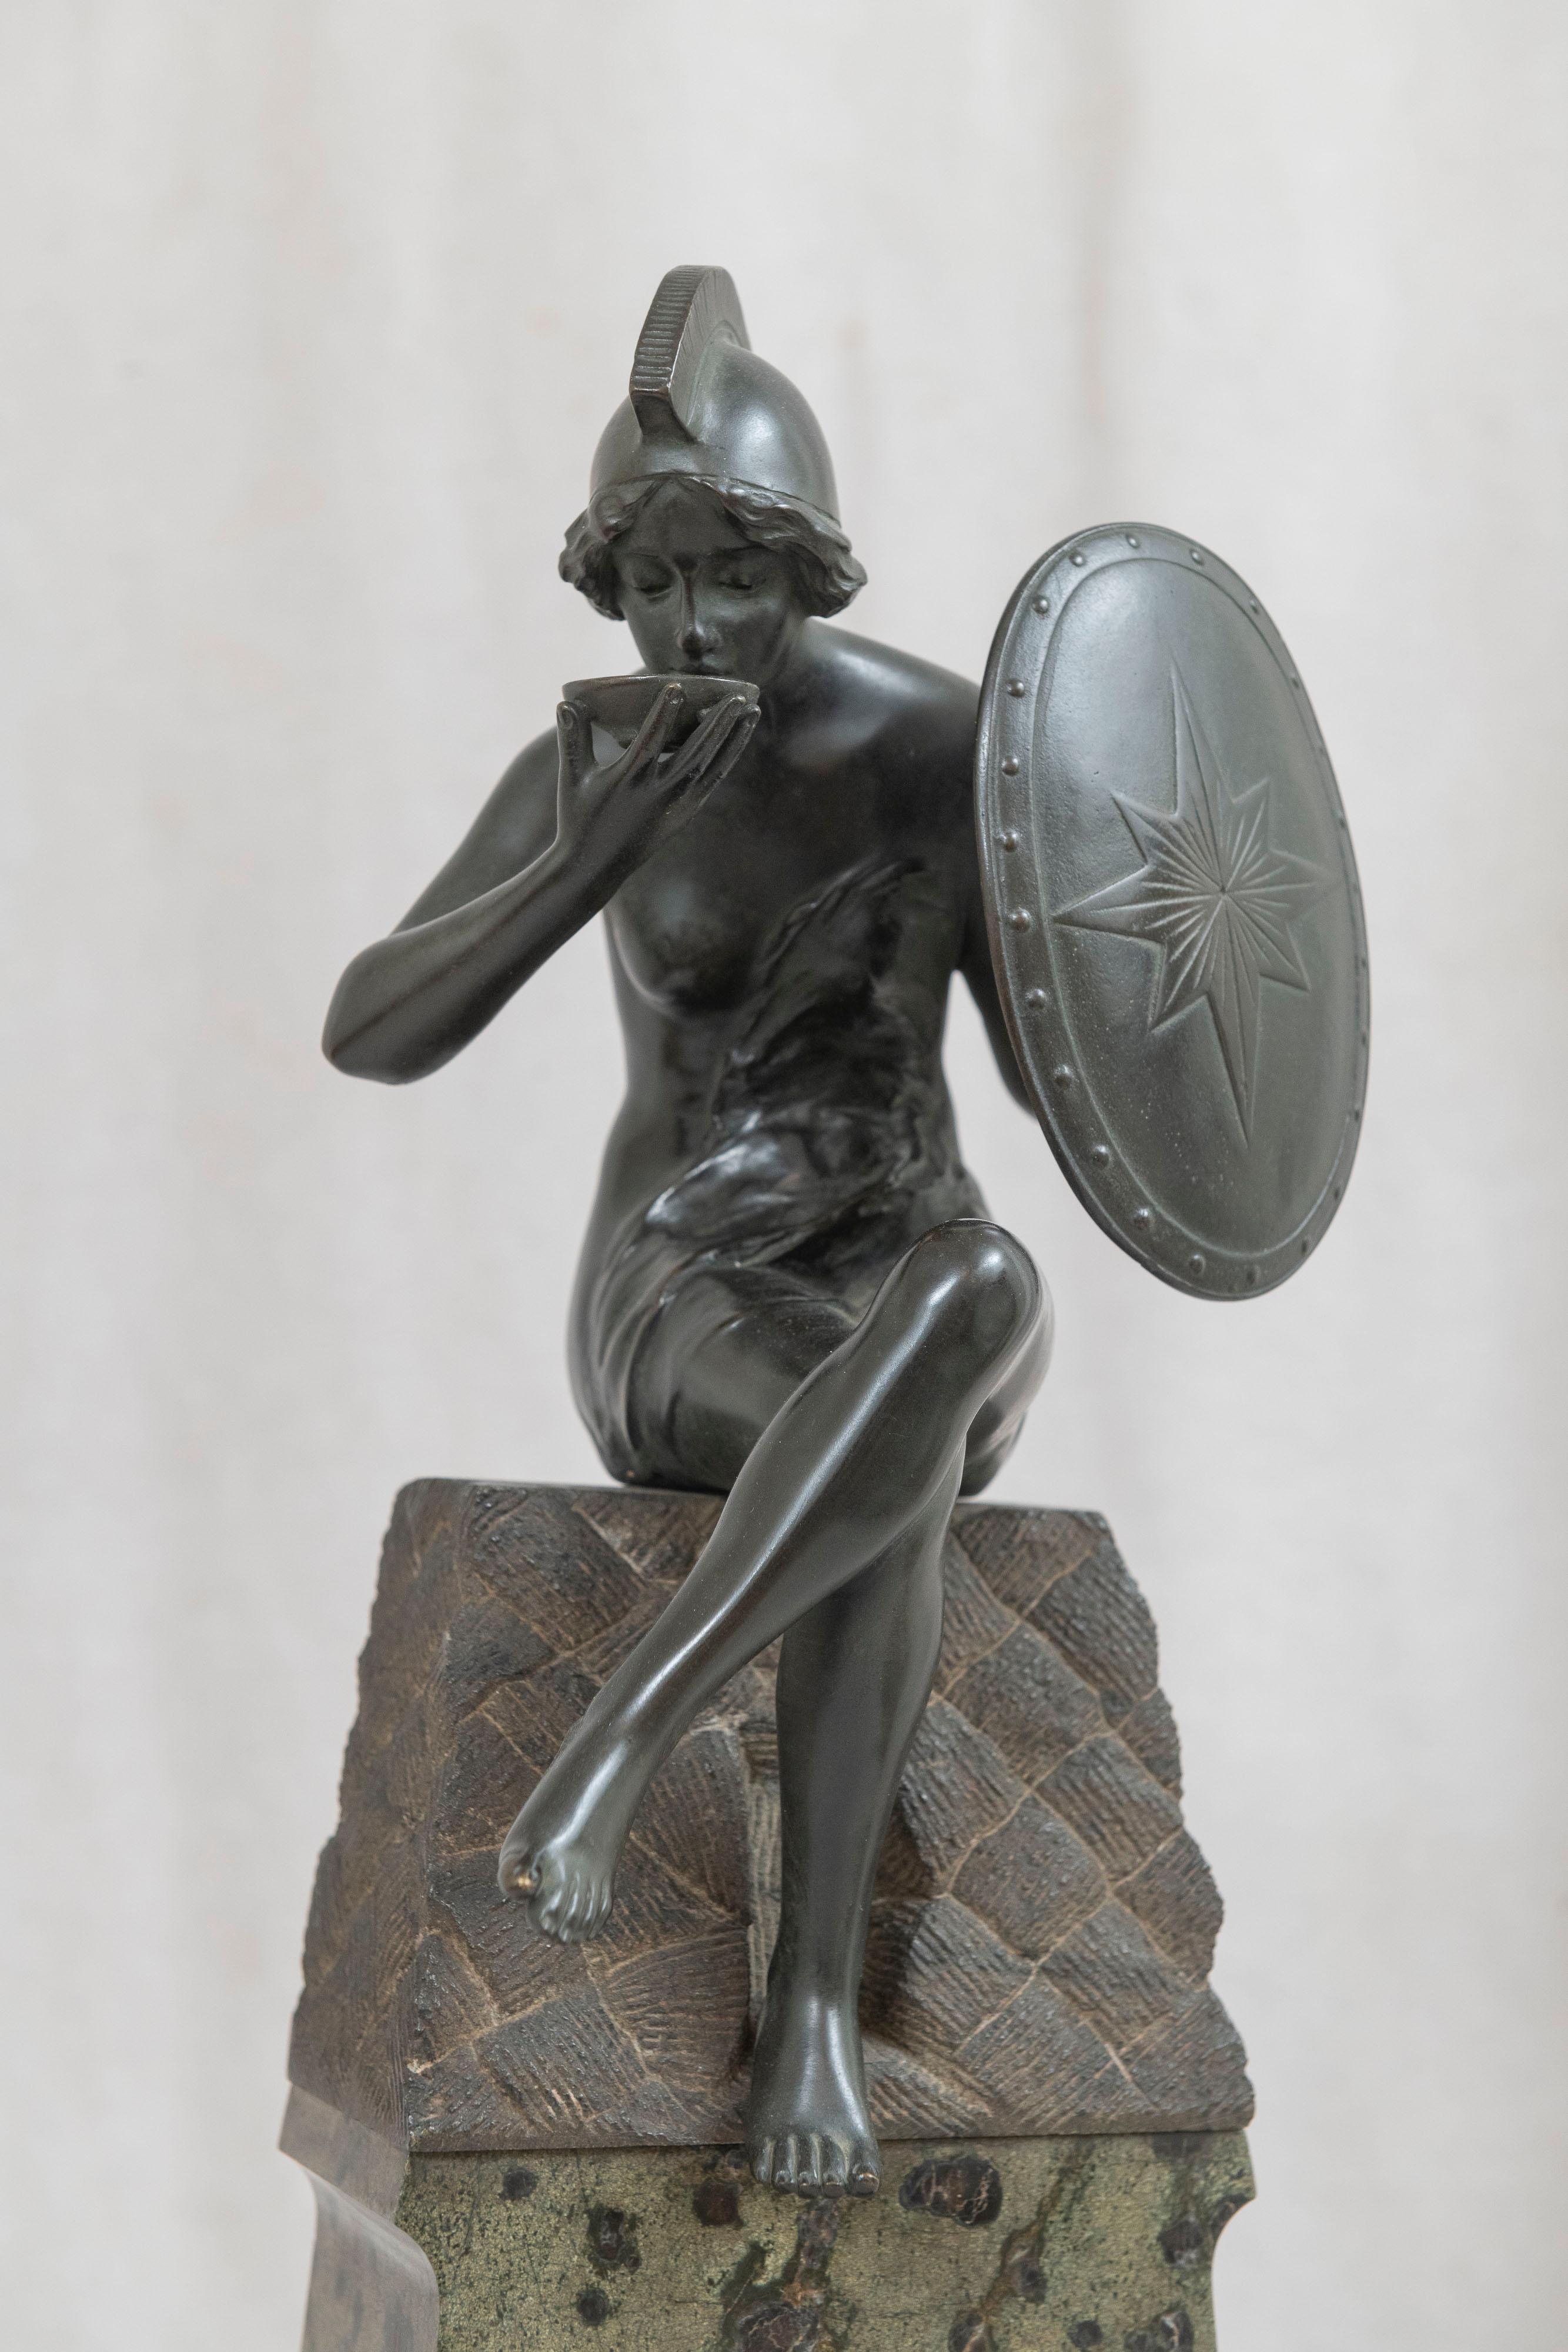 This unusual bronze really caught our attention. The seated female warrior perched high atop a marble base is a rare look in antique bronzes. The bronze itself is well cast and has a warm dark original factory patina. Where she sits looks like it